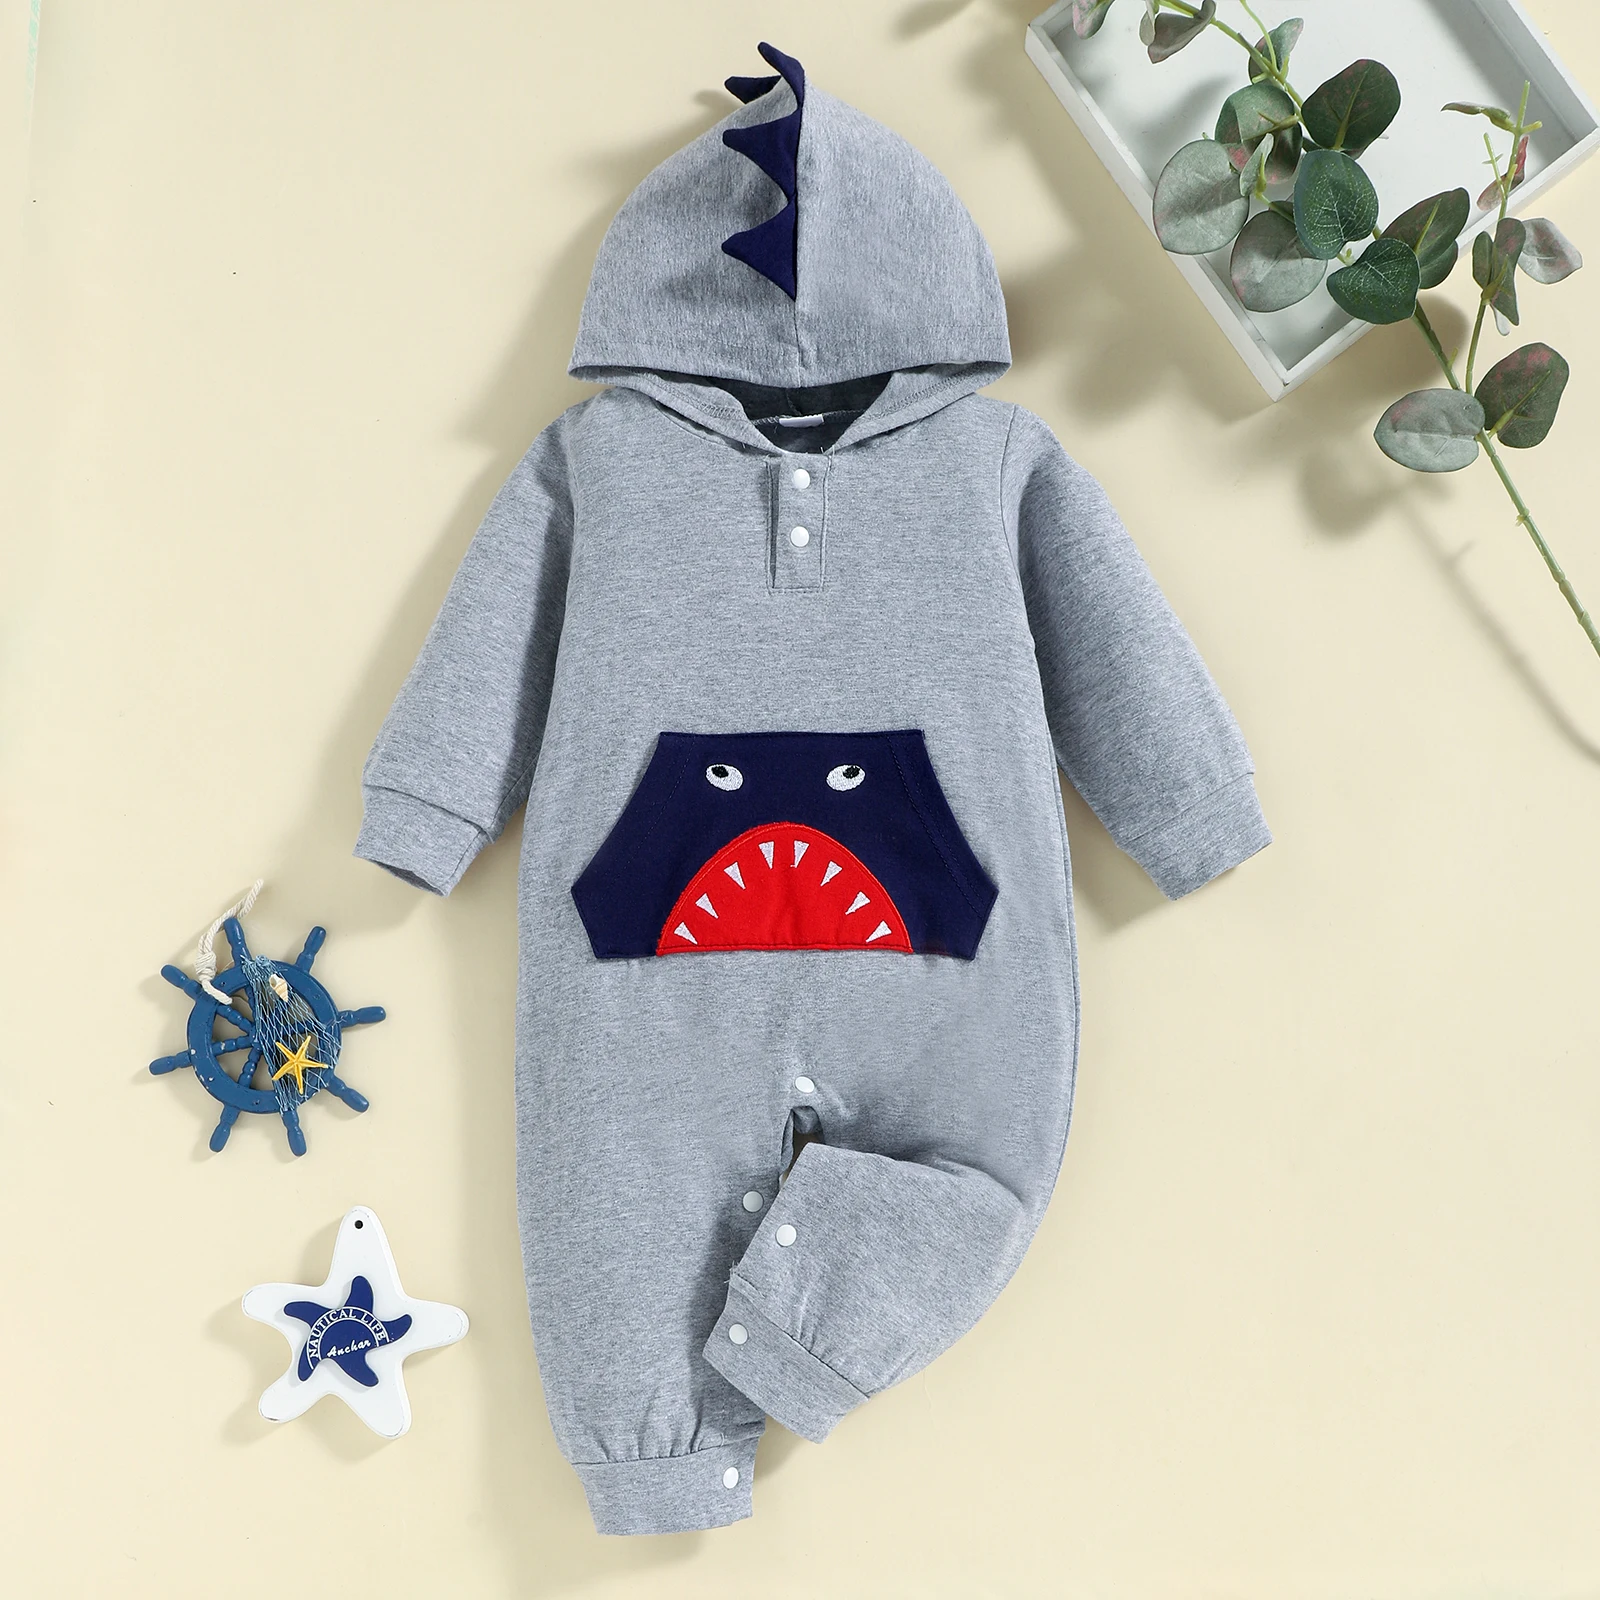 

fashion Autumn Winter 0-24m Newborn Infant Clothes Baby Boy hooded Romper Long Sleeve dinosaur Jumpsuit, As image shown